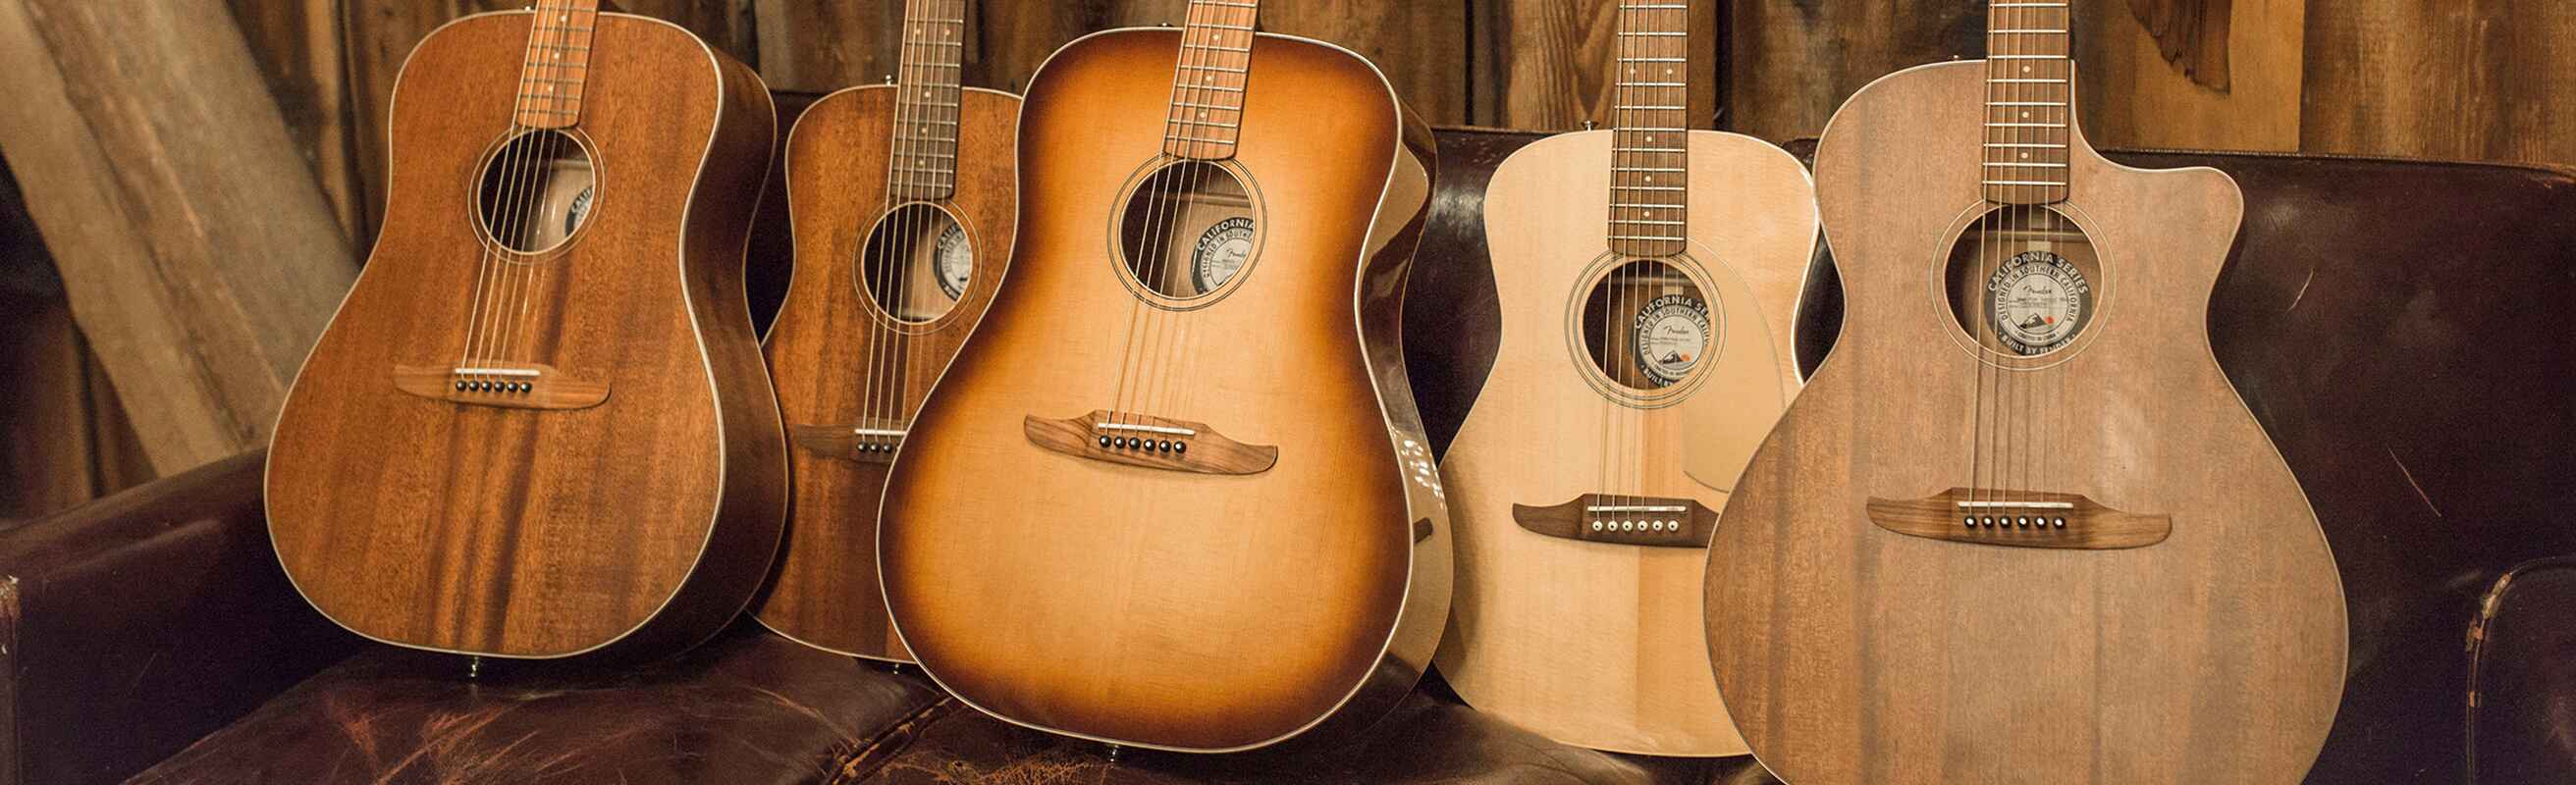 What Is A Good First Acoustic Guitar To Buy And Start Learning